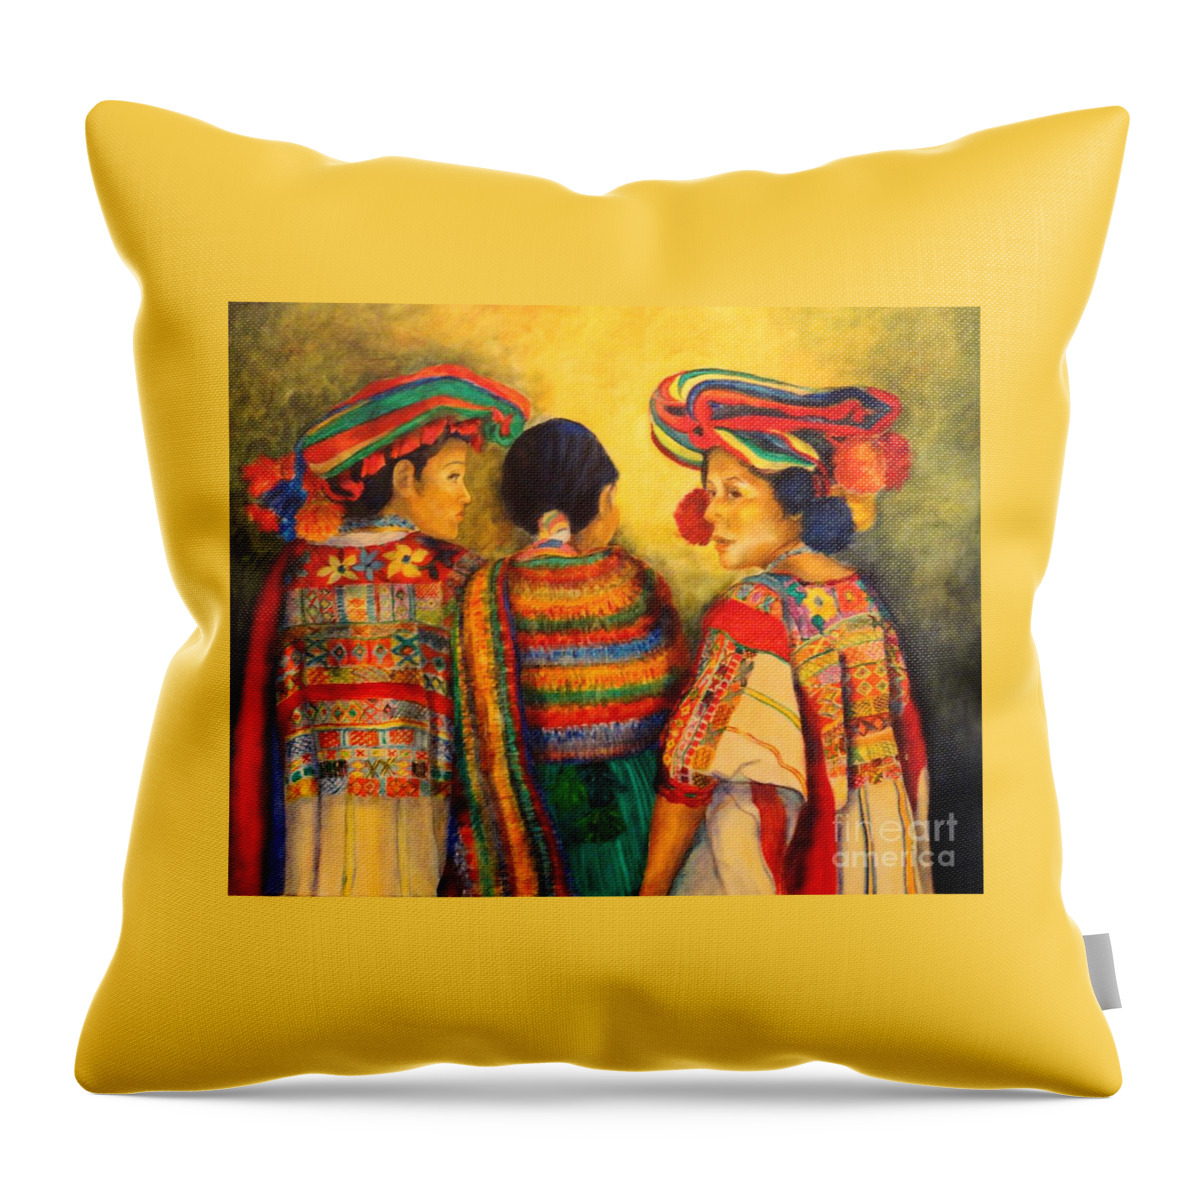 Mexico Throw Pillow featuring the painting Mexican Impression by Dagmar Helbig